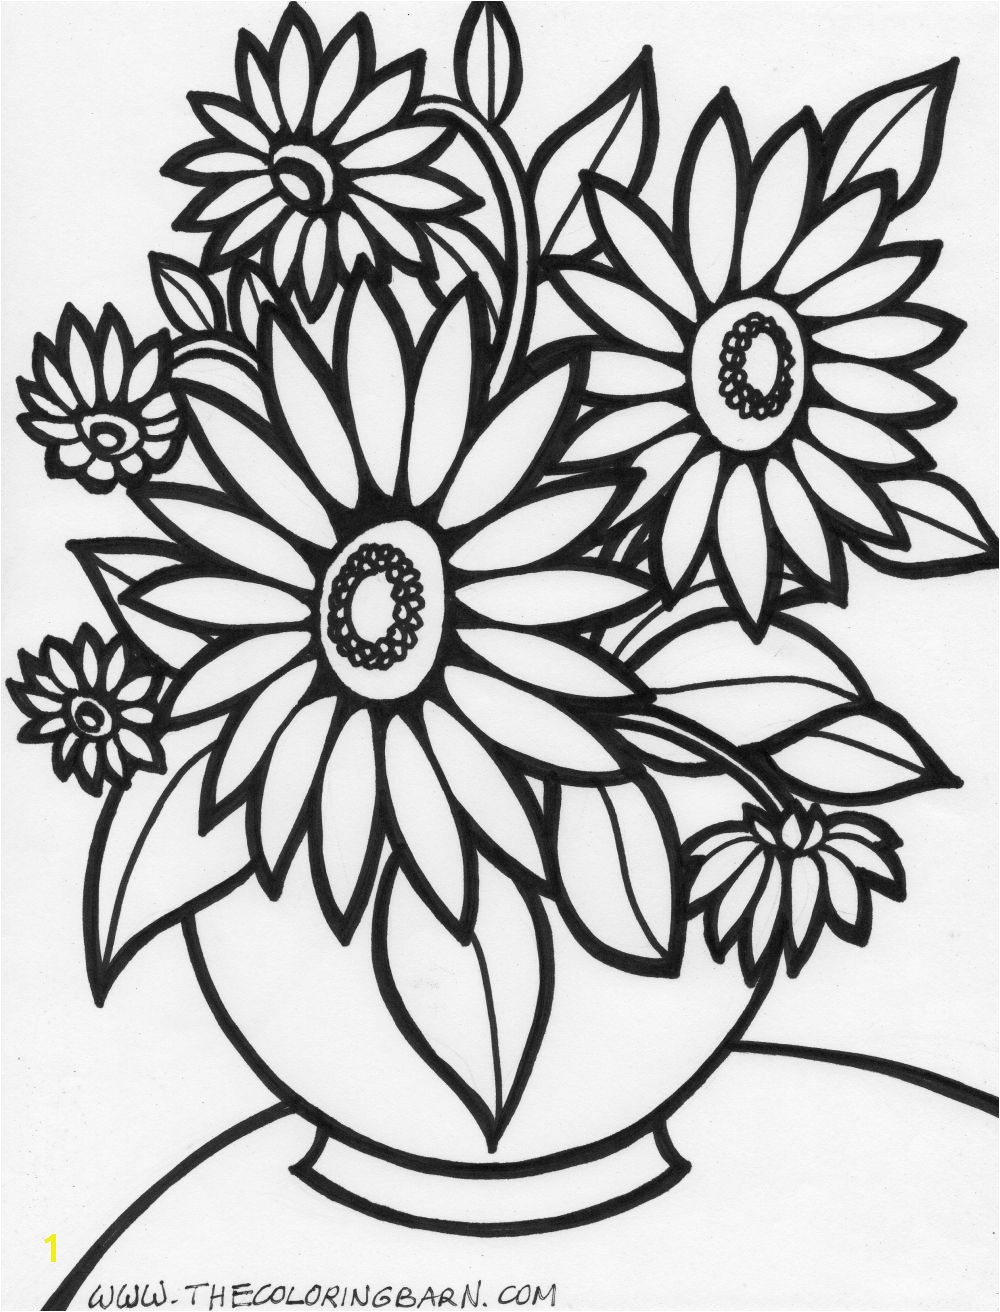 Flower Coloring Pages Free Printable Free Printable Flower Coloring Pages for Adults Veles Me Inside